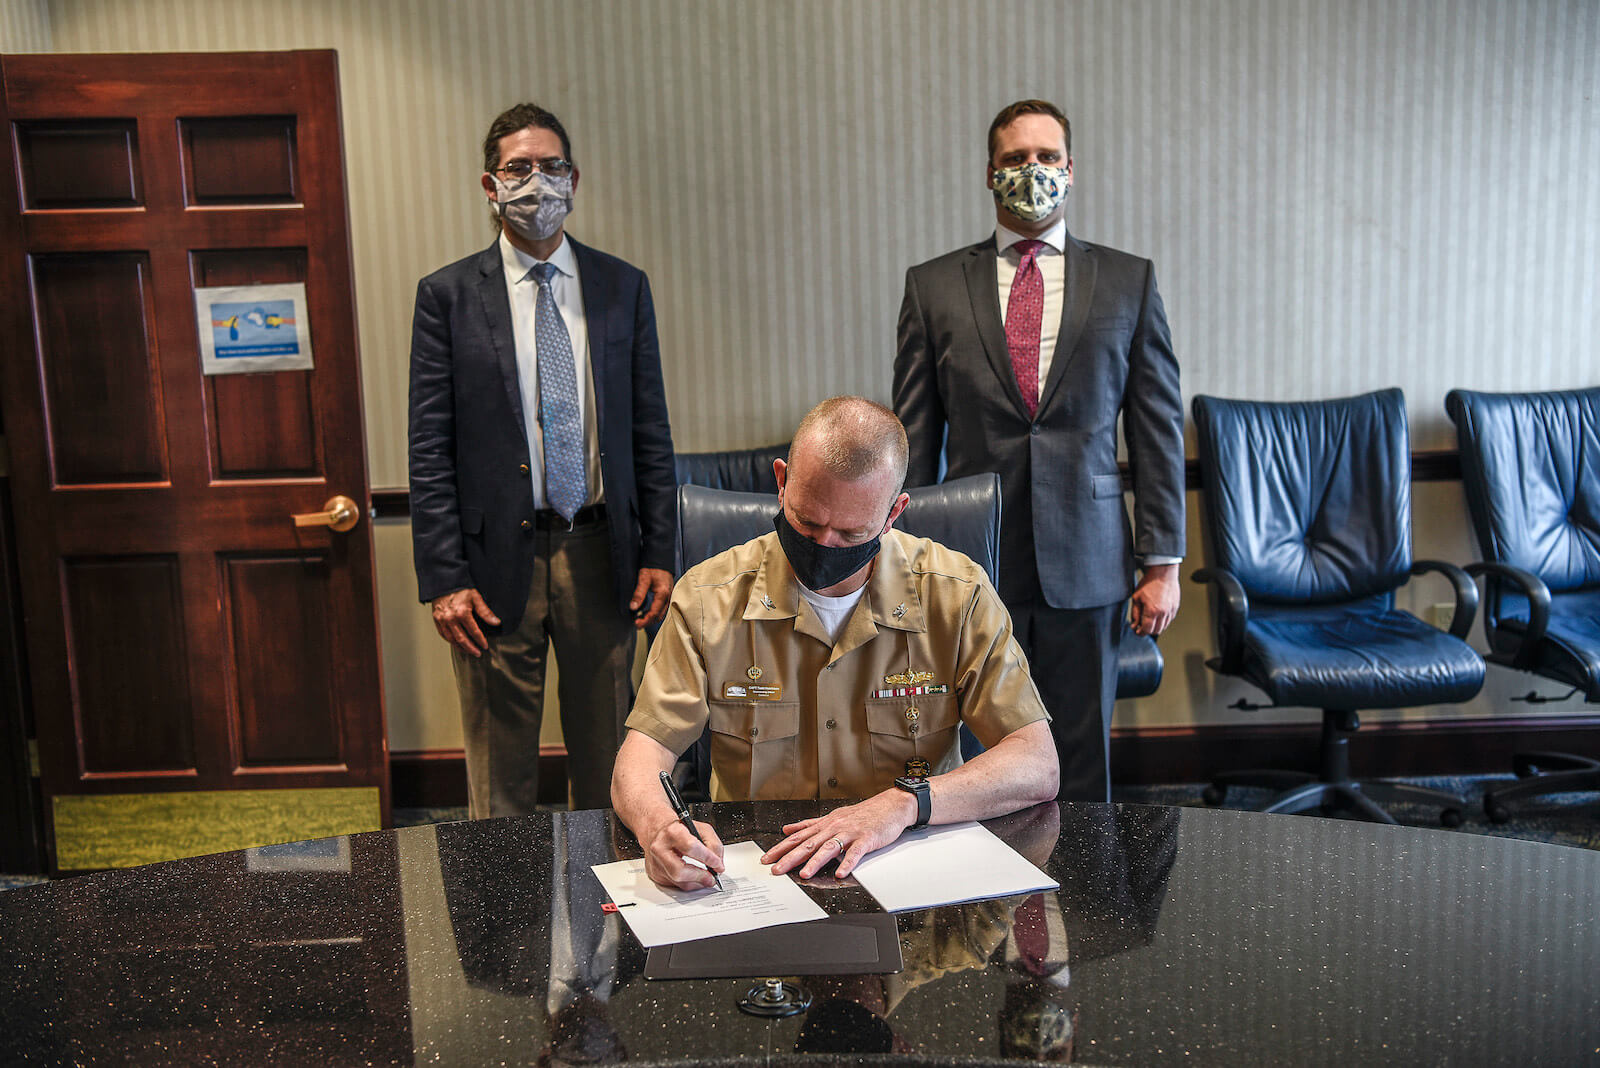 A man sitting at a wooden desk signing a document, while two men stand behind him in medical masks posing